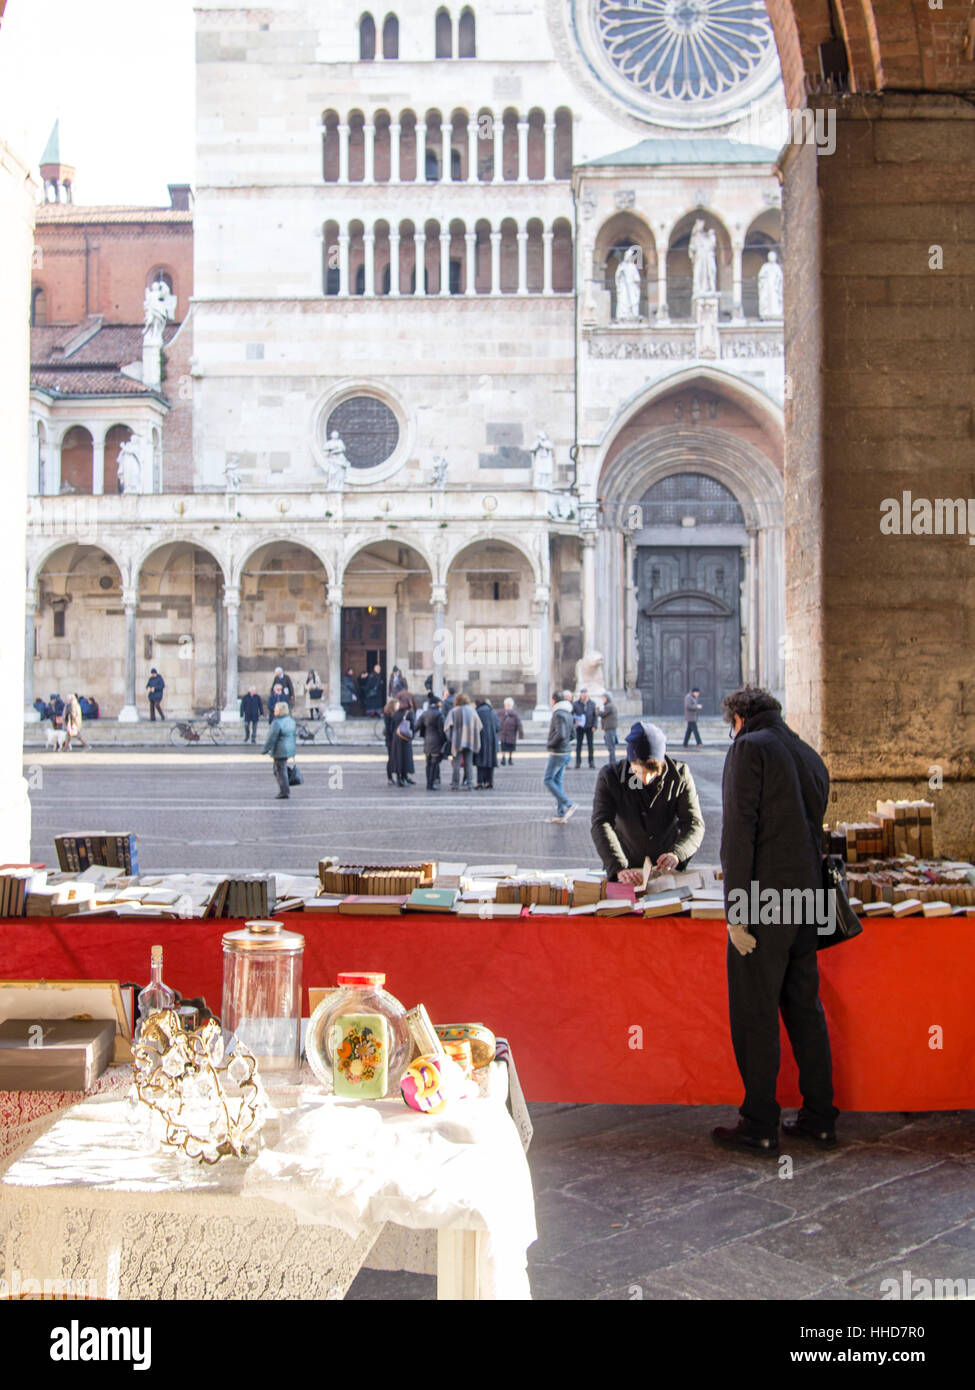 Book seller in street market, winter time, Lombardy, Italy Stock Photo